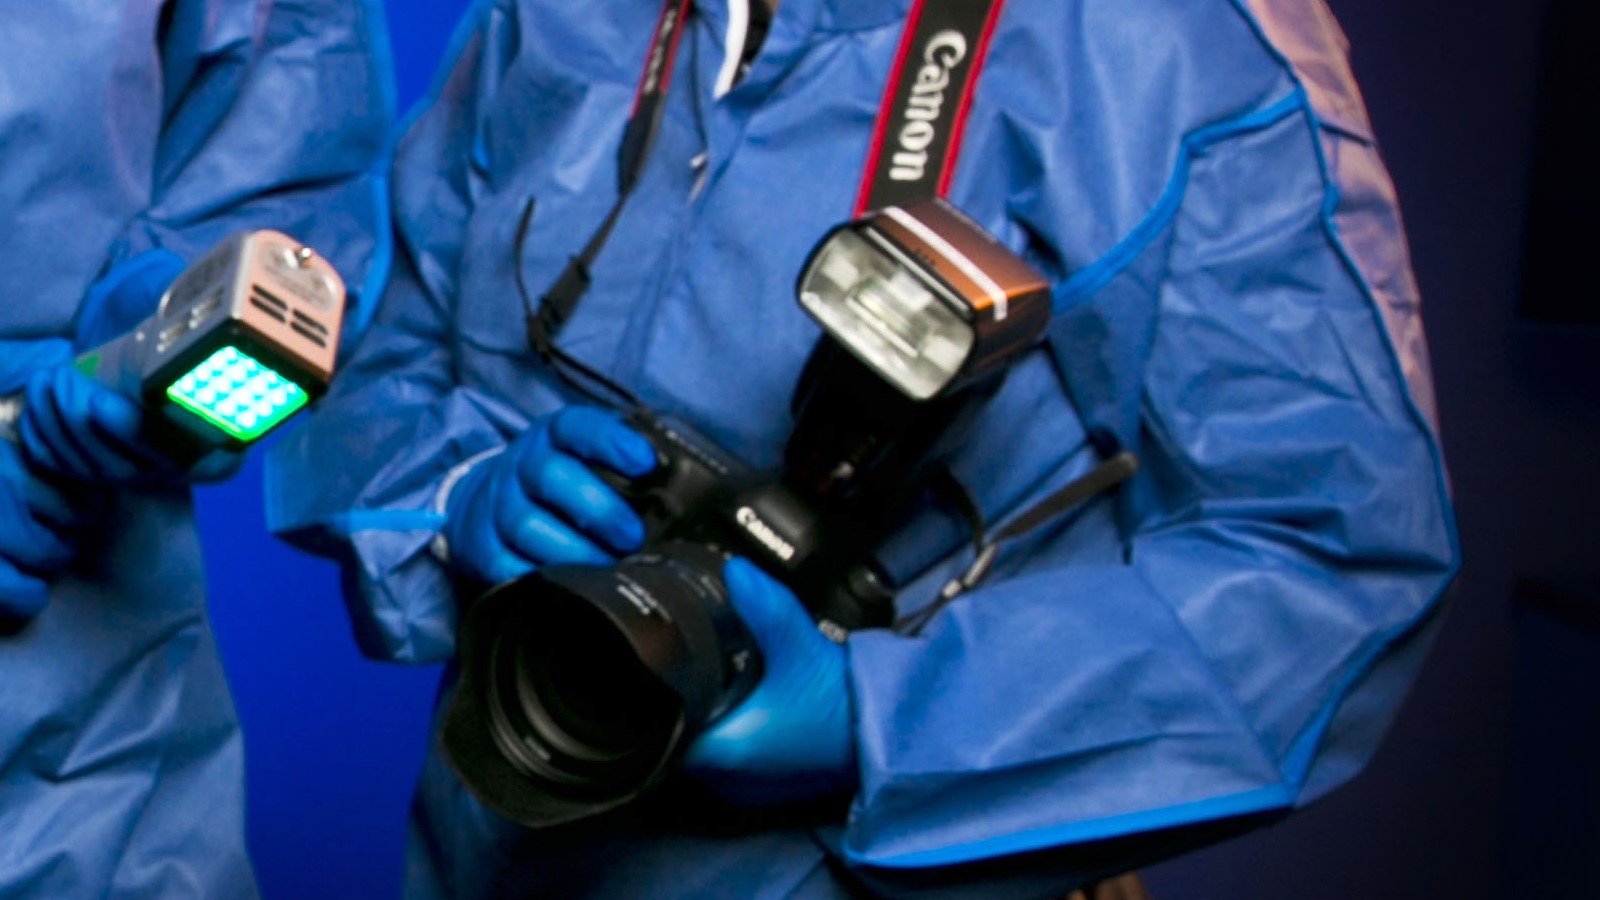 Forensic officer holding a camera